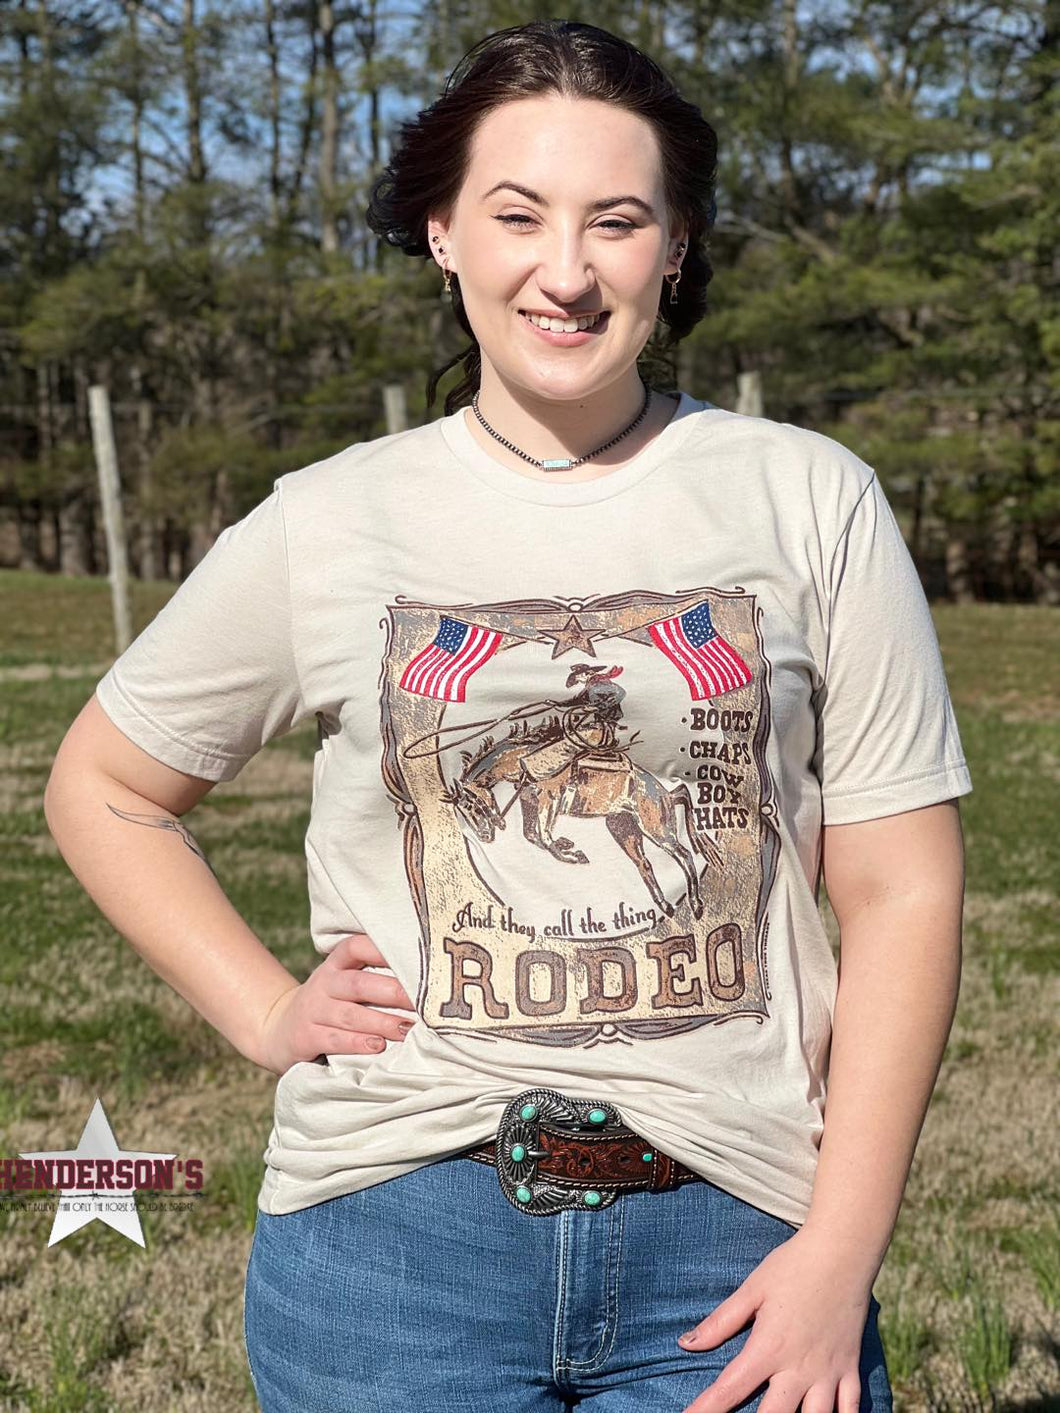 They Call The Thing Rodeo Tee - Henderson's Western Store